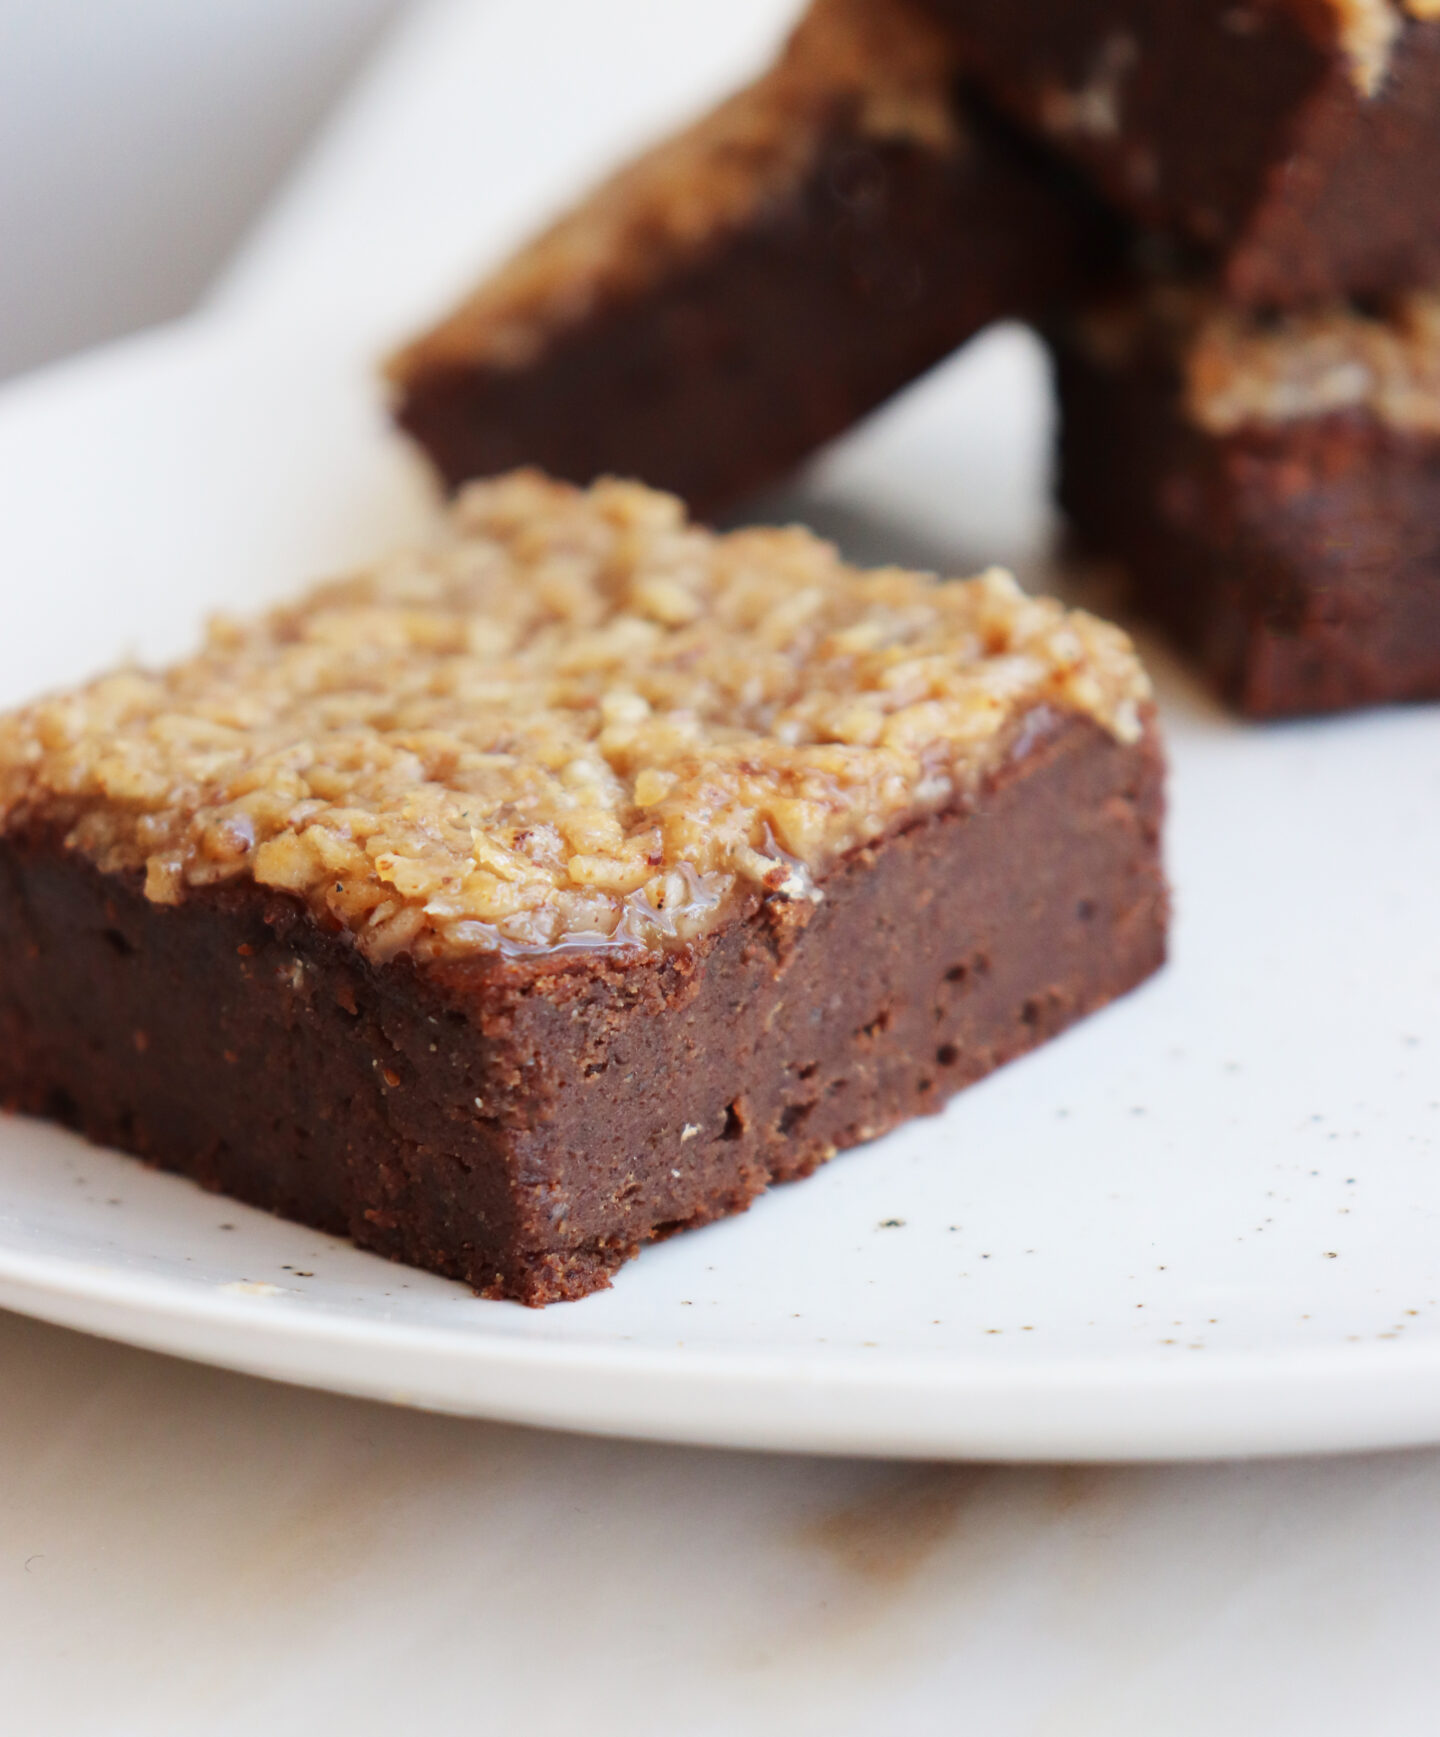 Chocolate brownie cake squares with coconut caramel topping A.K.A. Choklad toscakaka